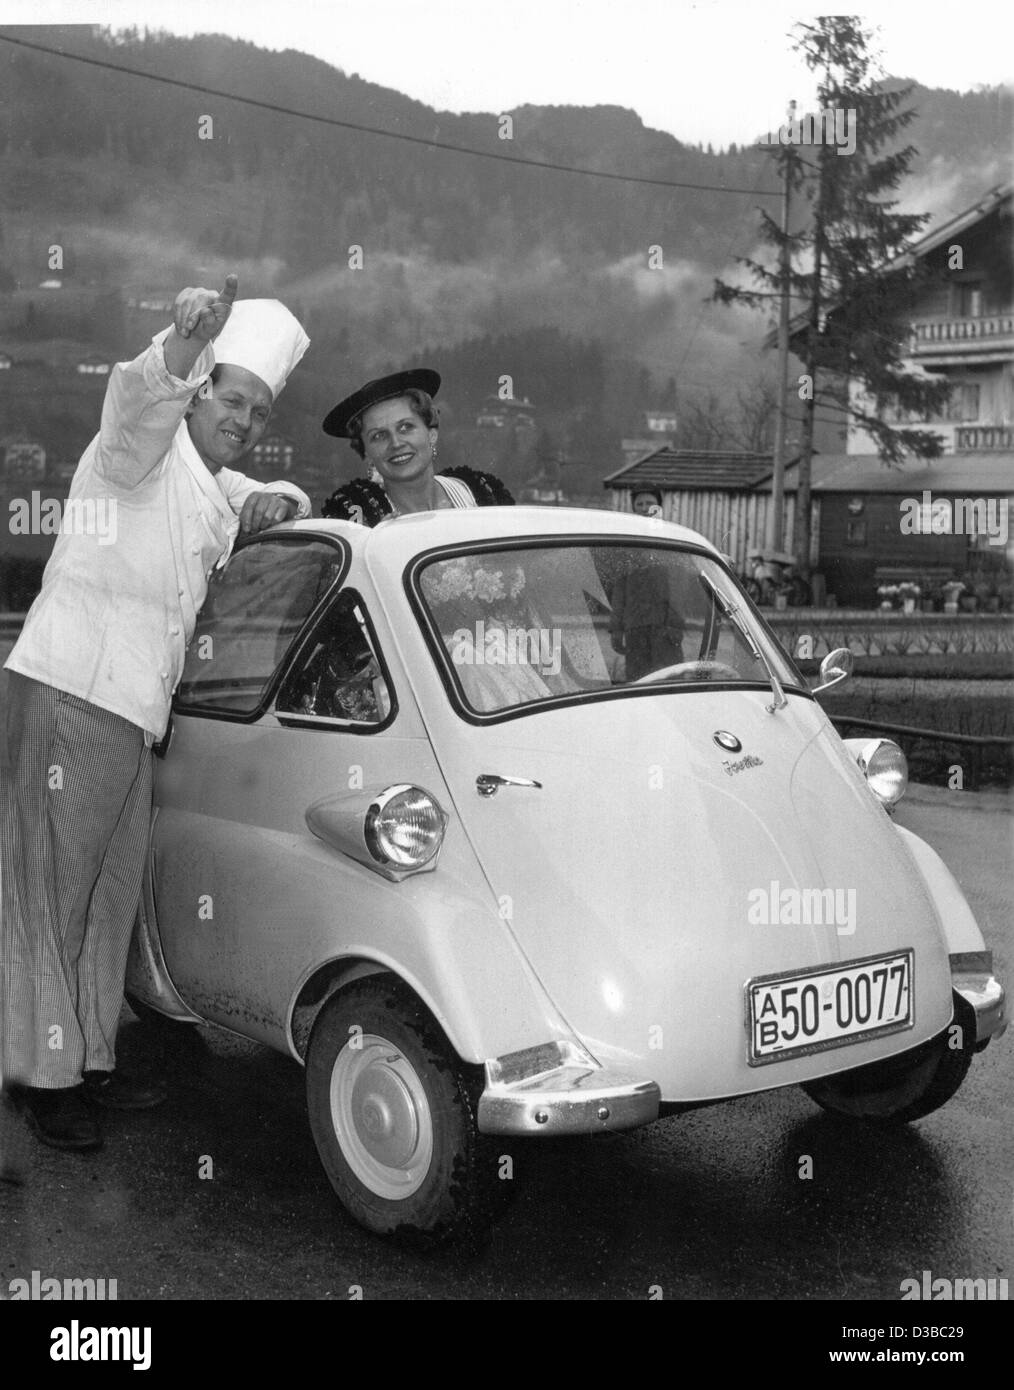 (dpa files) - A chef shows the driver of a BMW Isetta Coupe the way, West Germany, 1955. The compact car is entered by the front door and has two seats. BMW released the model in 1955. Stock Photo